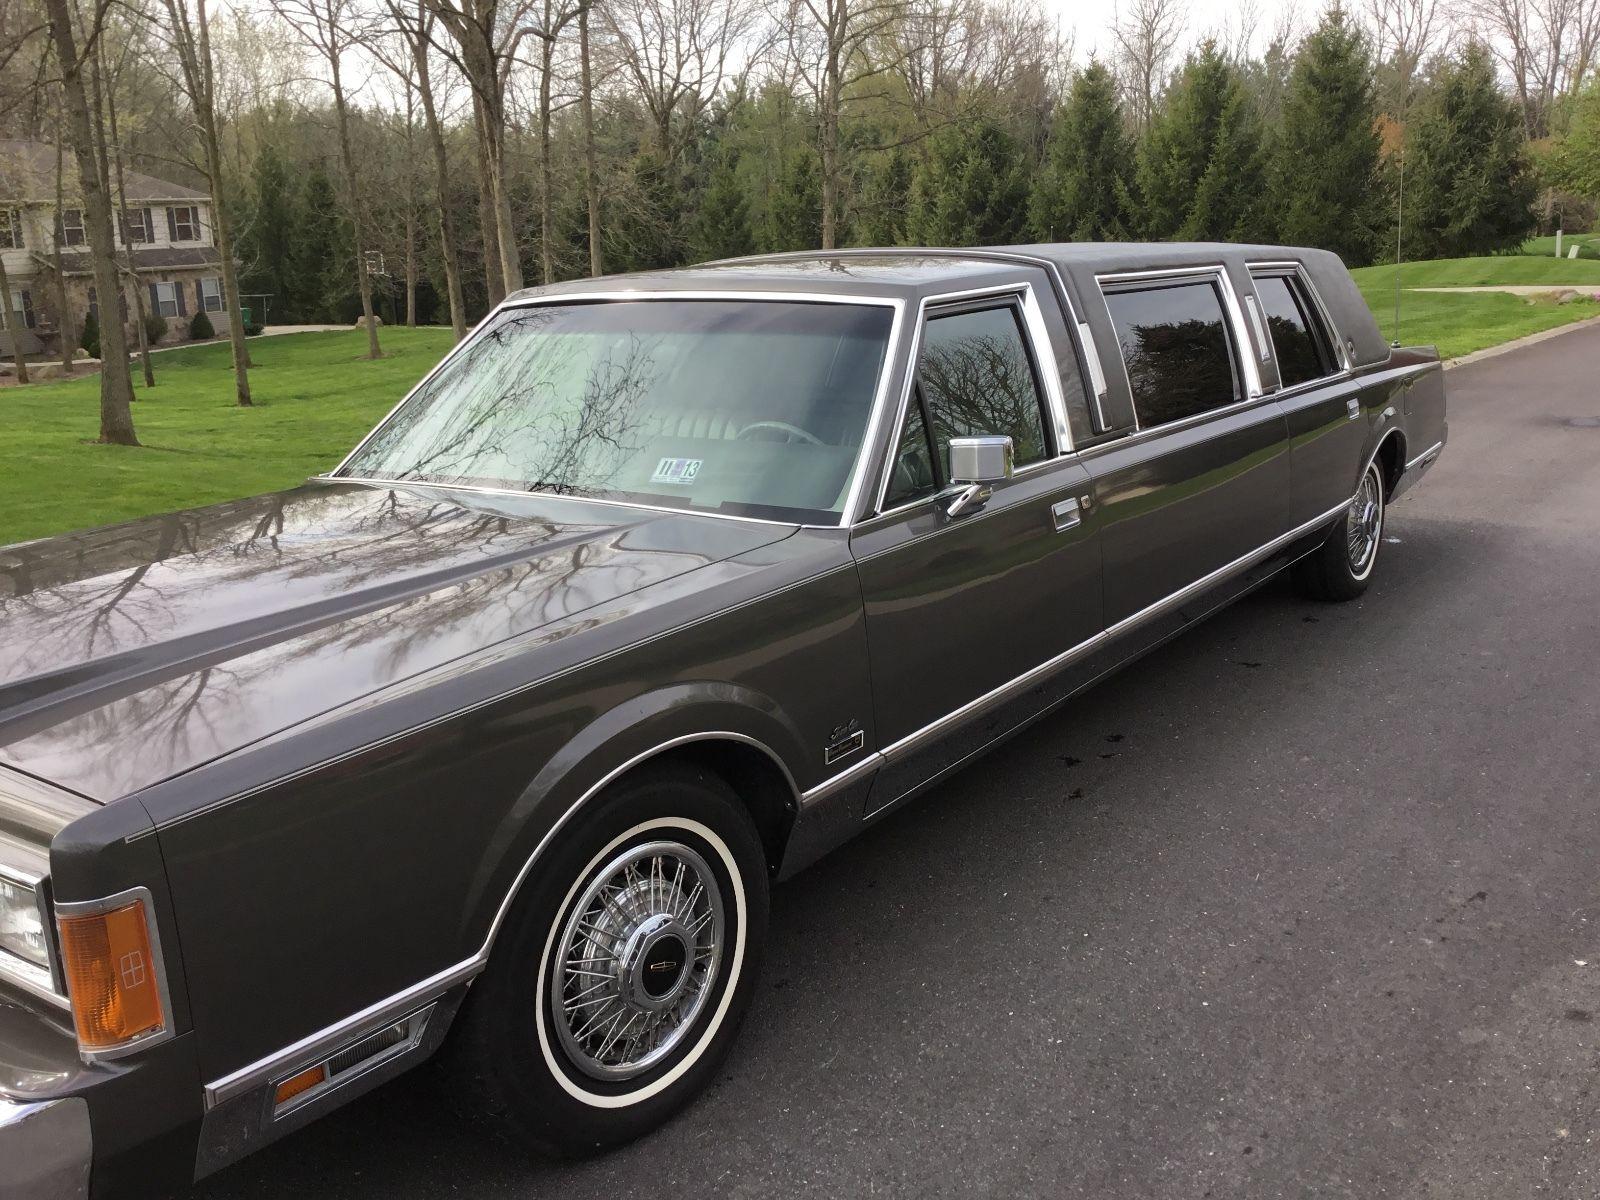 Lincoln Town car Limo 1989